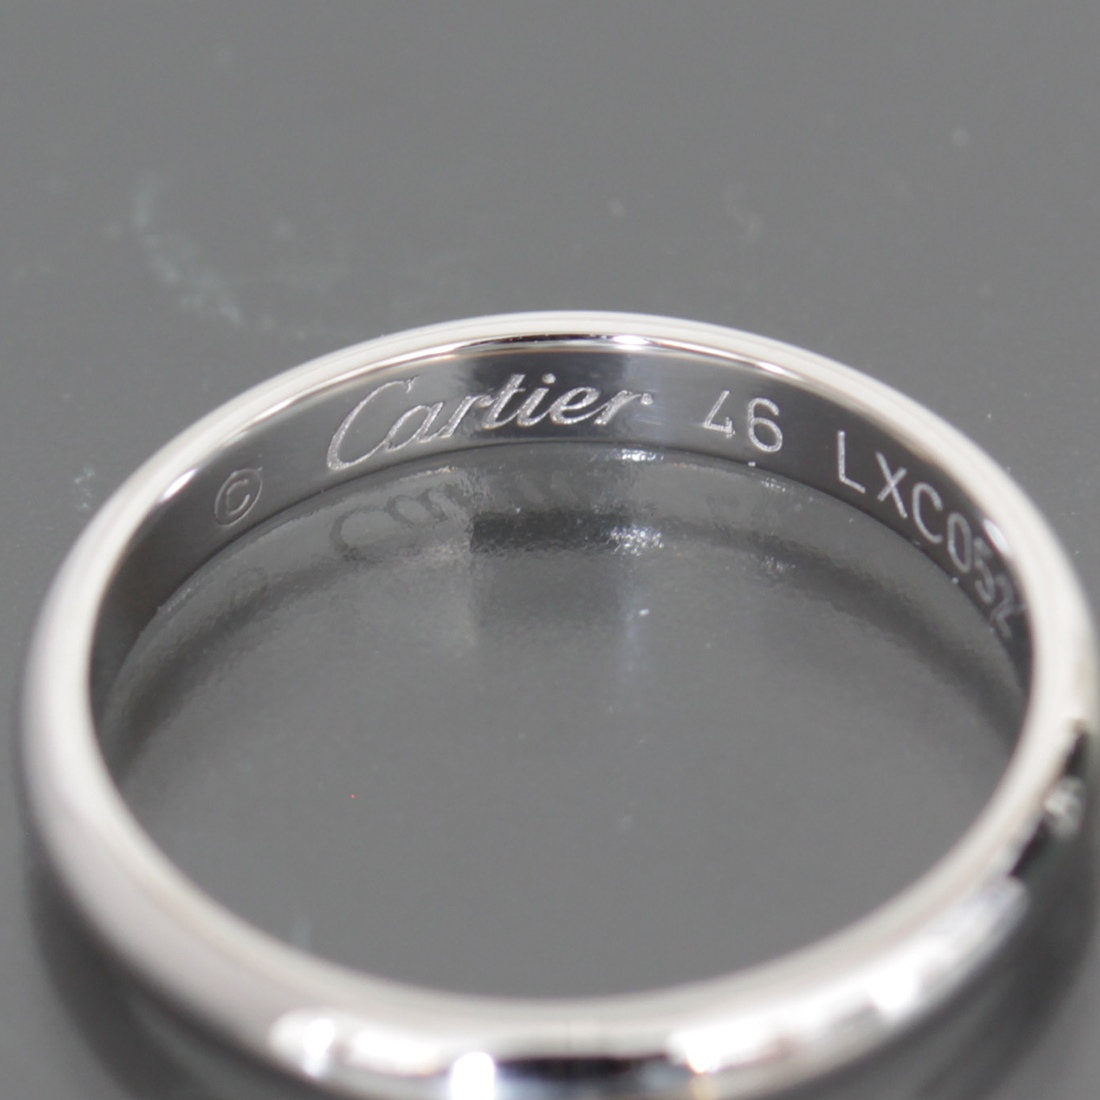  Cartier wedding ring 6 number Pt950 2.5mm width guarantee new goods finish settled * ring declared size 46 2.5g wedding Cartier 5476A